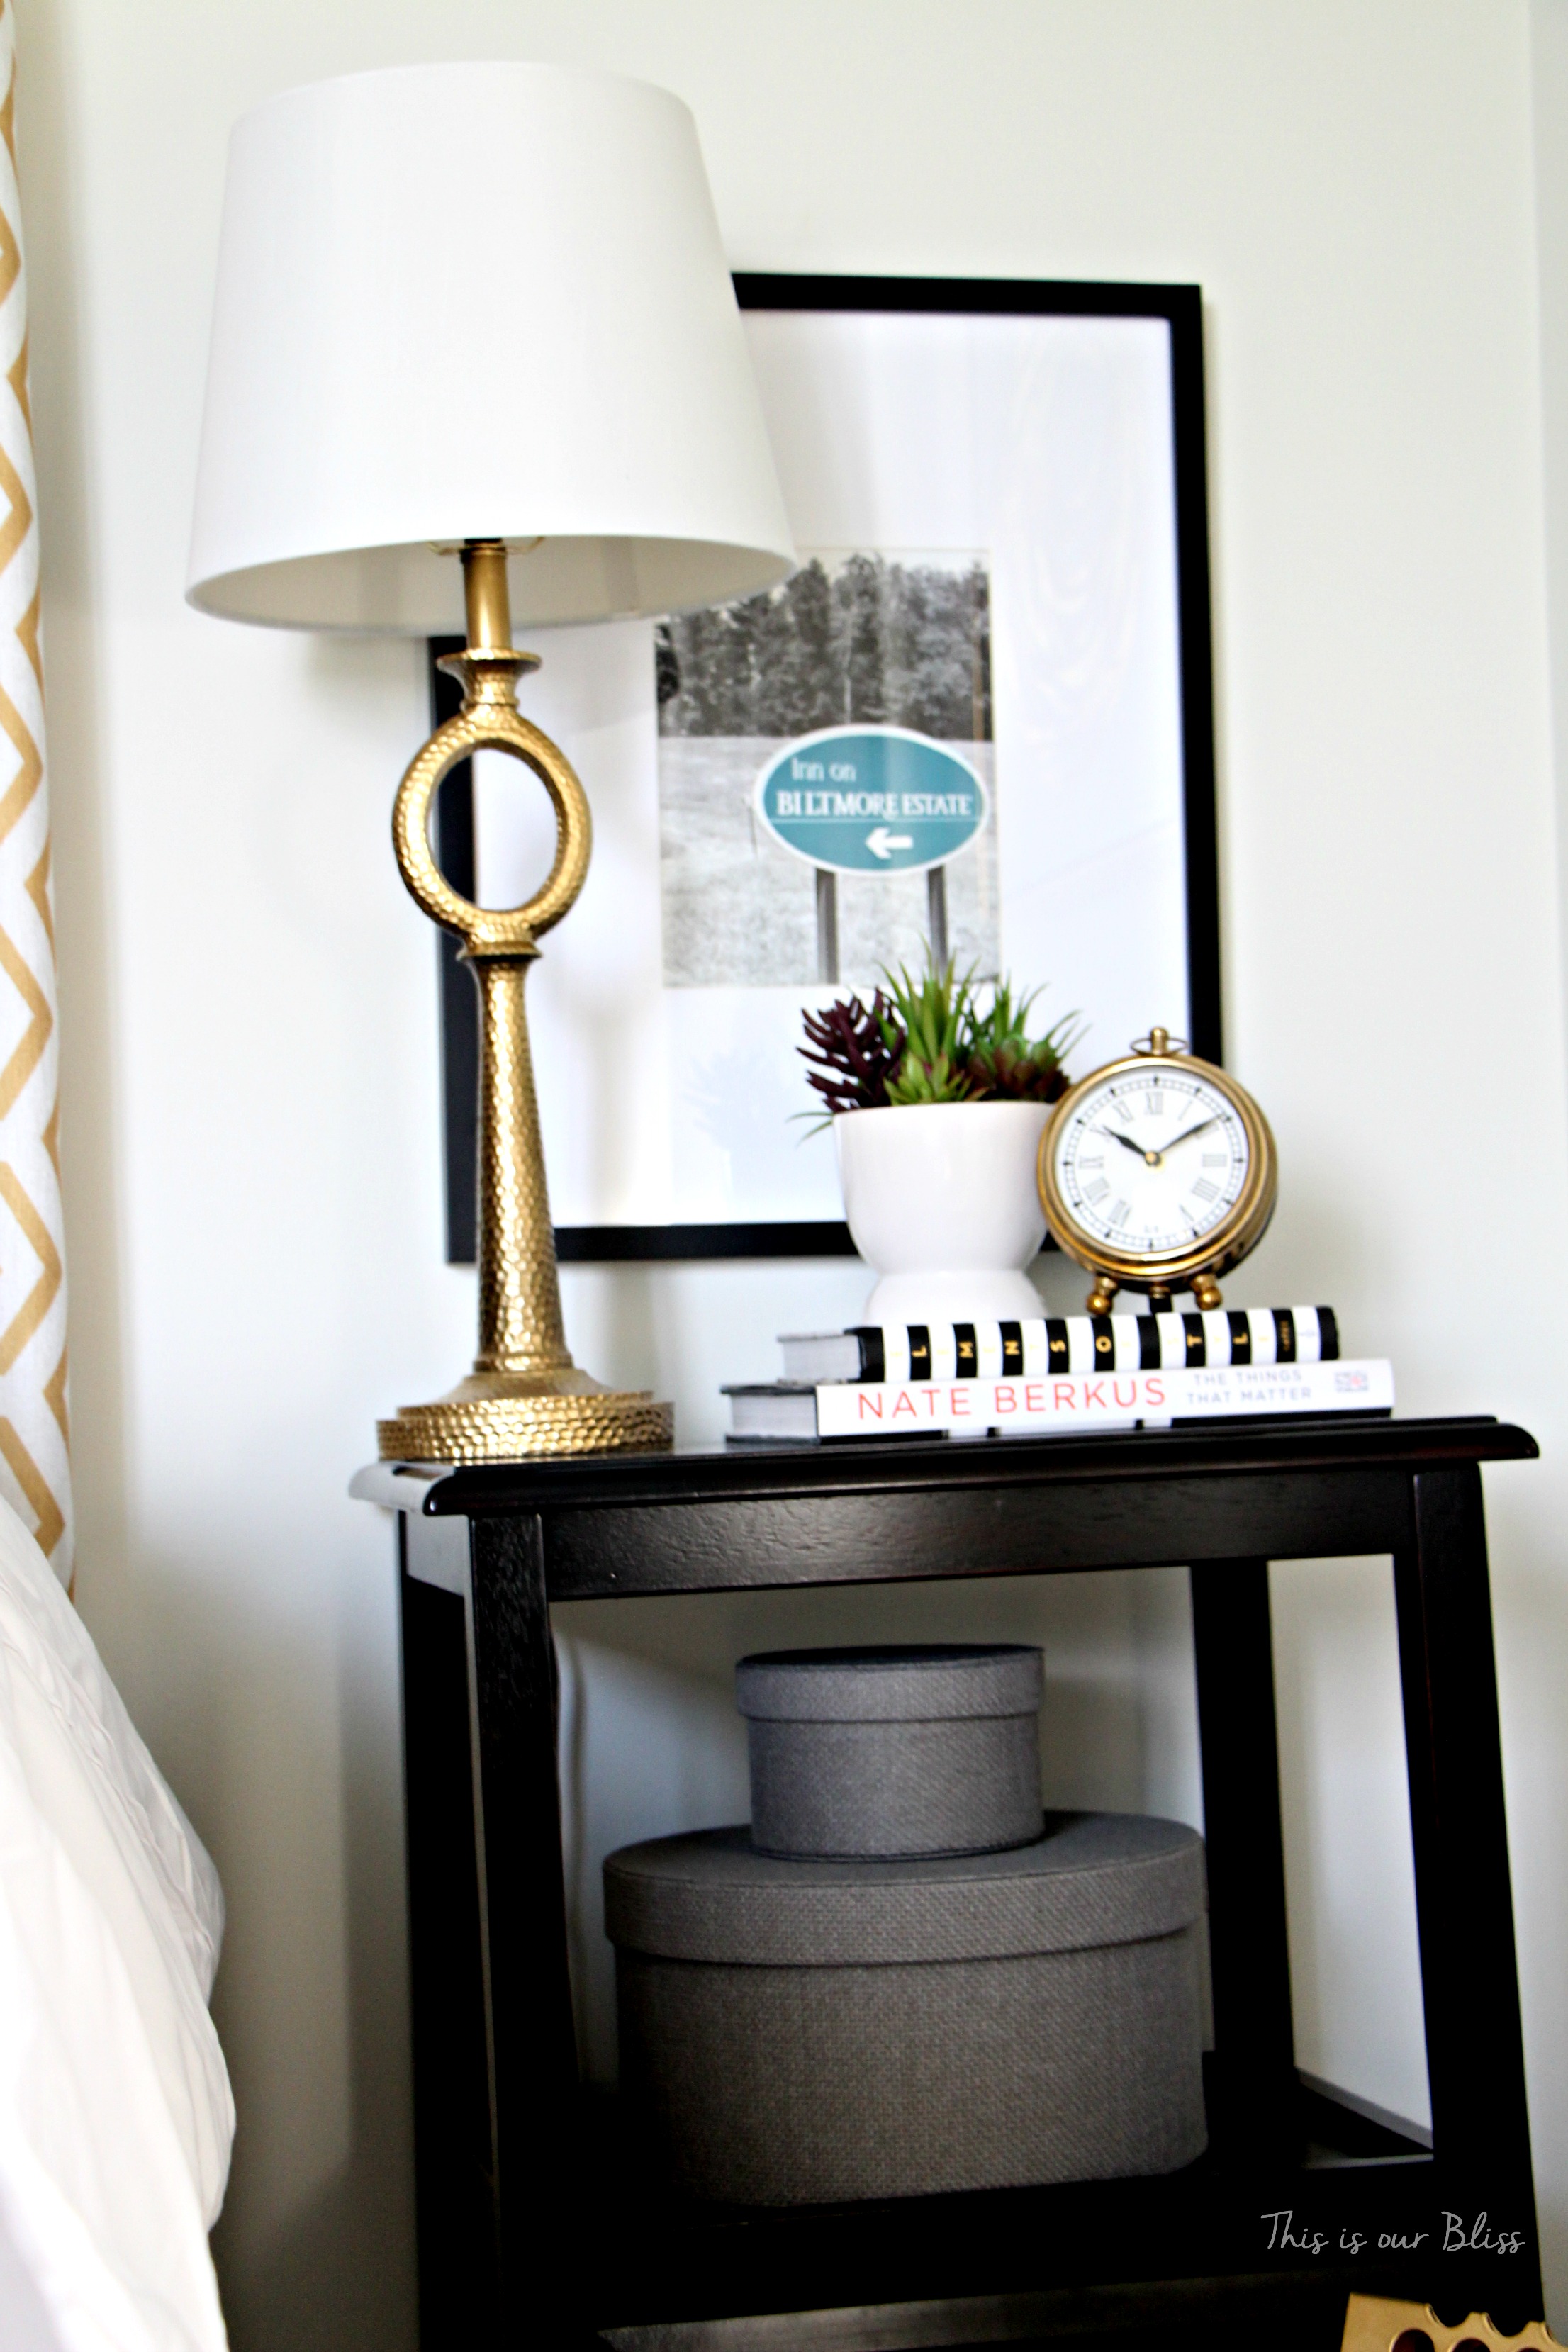 Guestroom revamp - bedside table - gold lamp & clock - succulent - Nate Berkus book -This is our Bliss